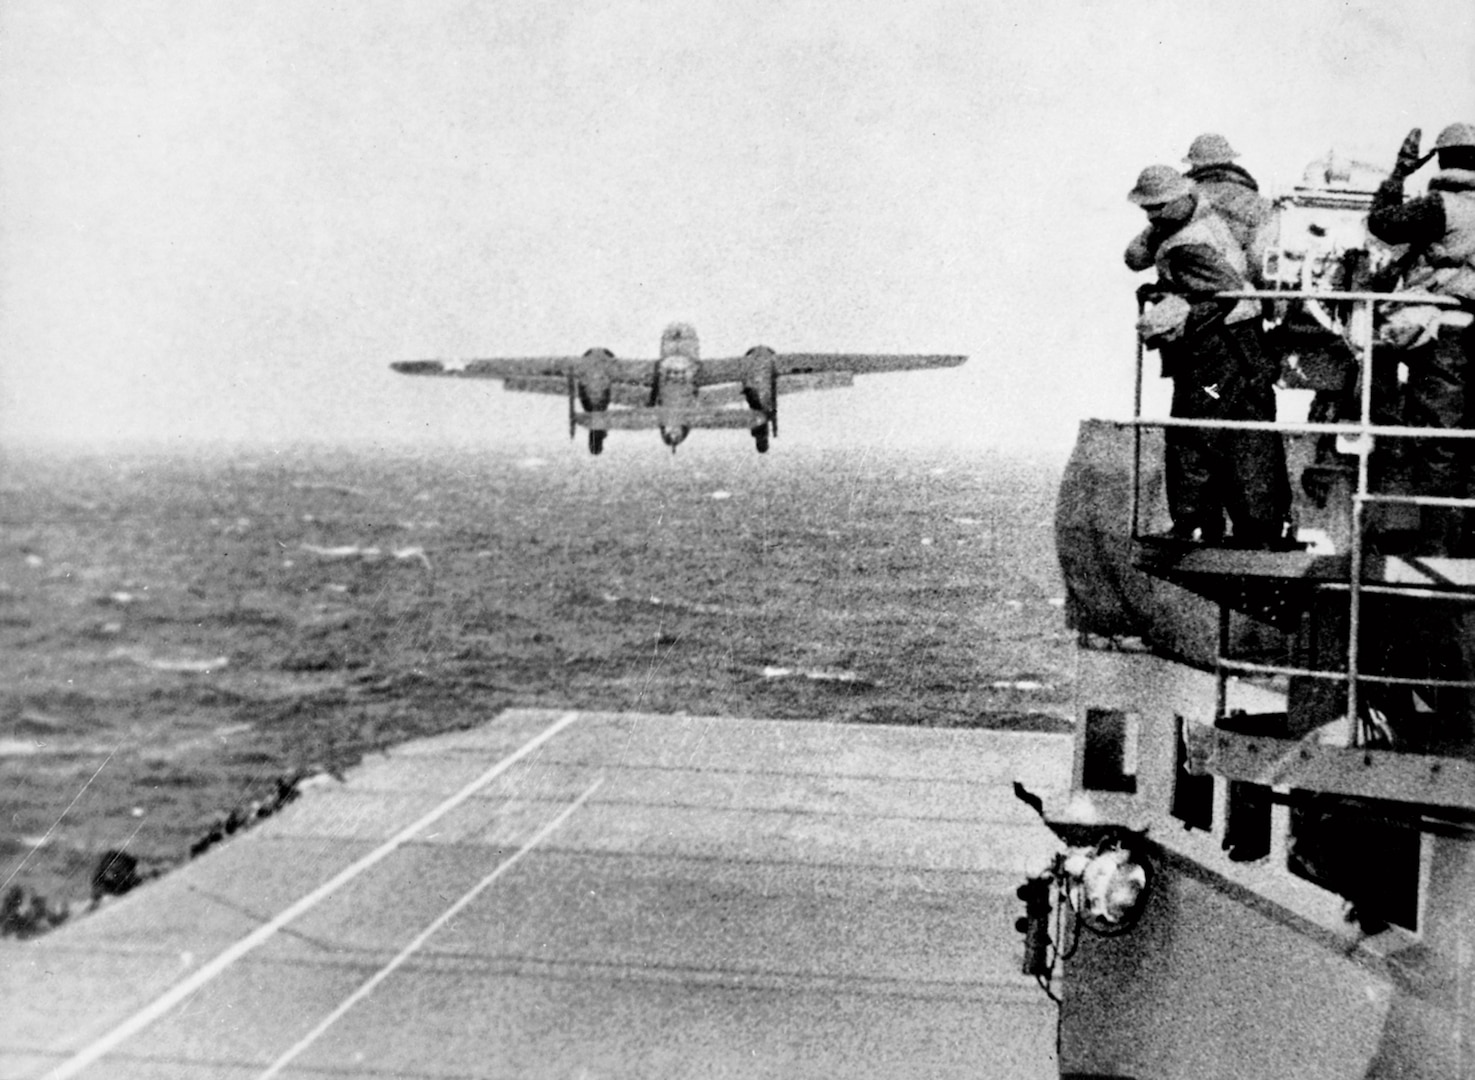 U.S. Army Air Forces North American B-25B Mitchell bomber takes off from USS Hornet as part of first wave of Doolittle Raid, April 18, 1942 (U.S. Navy/
U.S. National Archives and Records Administration)